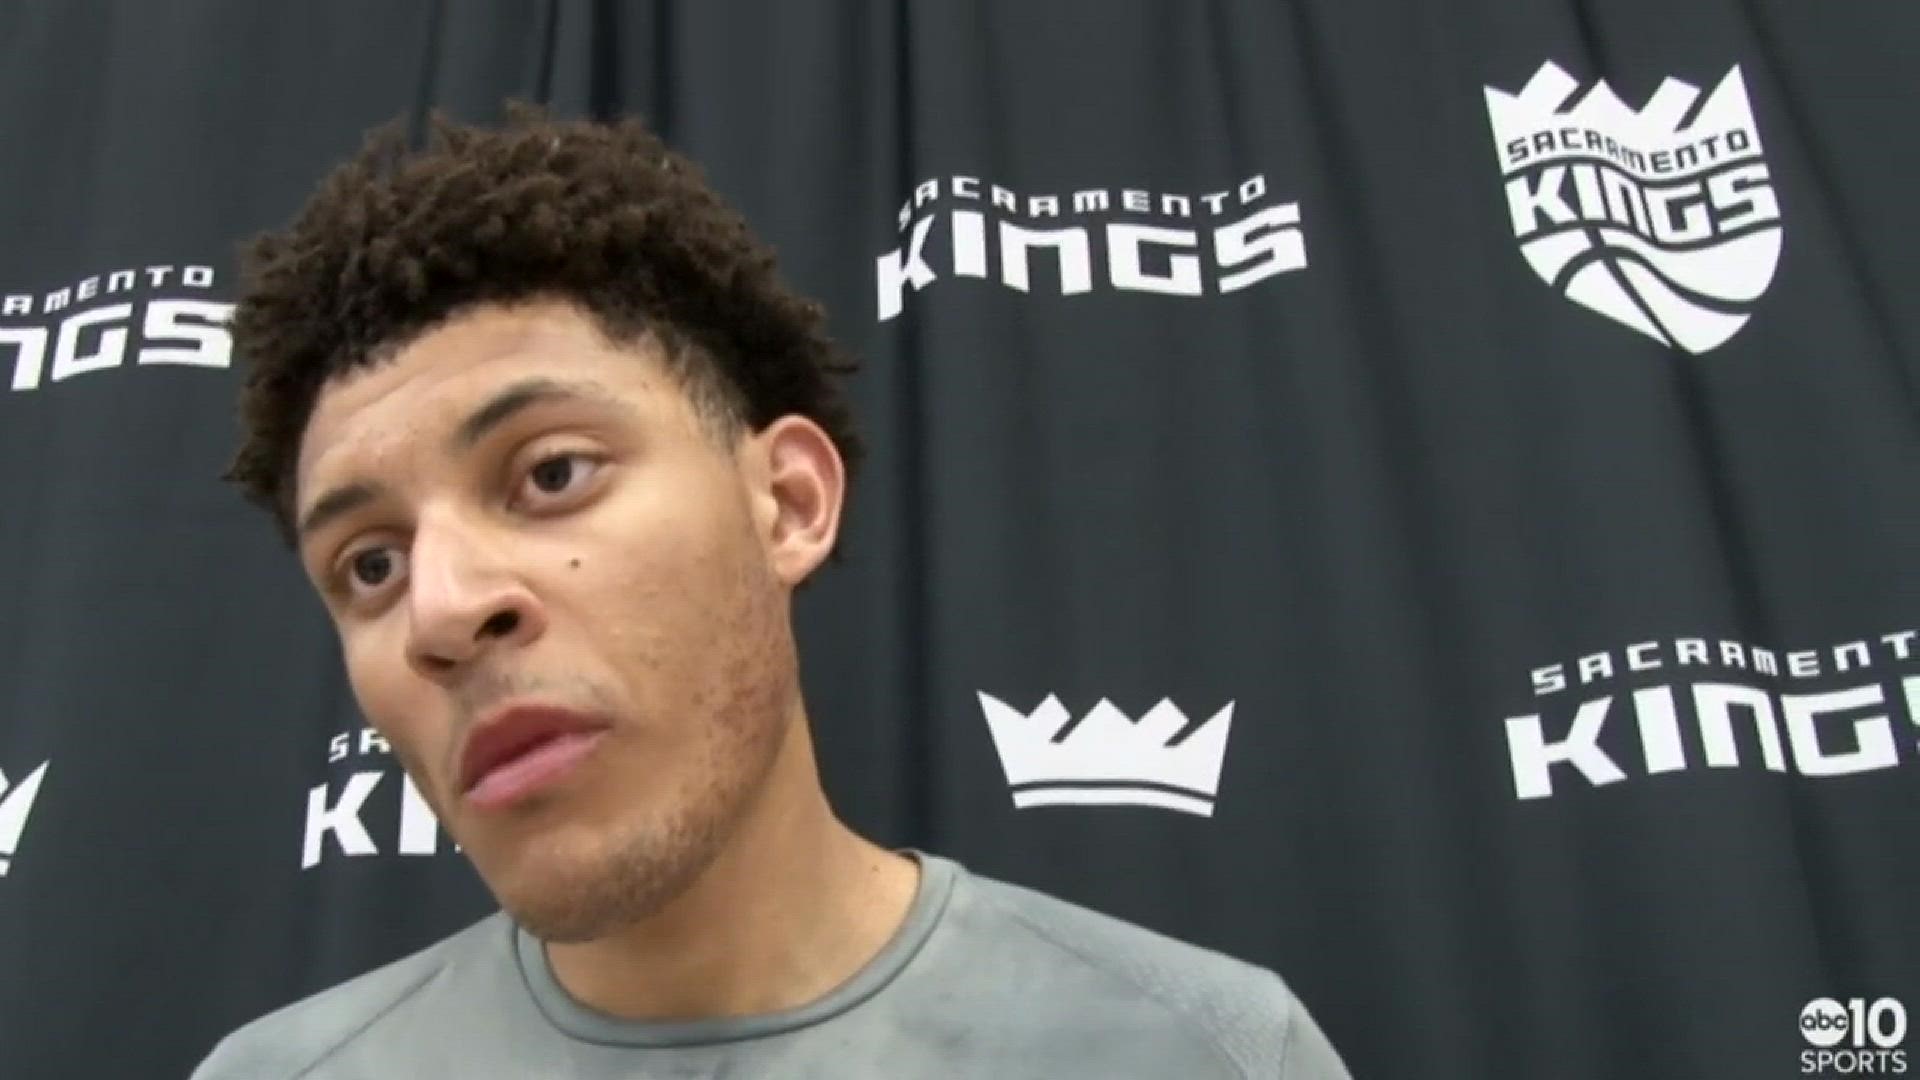 Kings rookie Justin Jackson, who played at North Carolina for three seasons winning the National Championship last season, reacts to Thursday's news of reported NCAA violations. He also begins by reflecting on Wednesday's heartbreaking loss to the Oklahoma City Thunder.